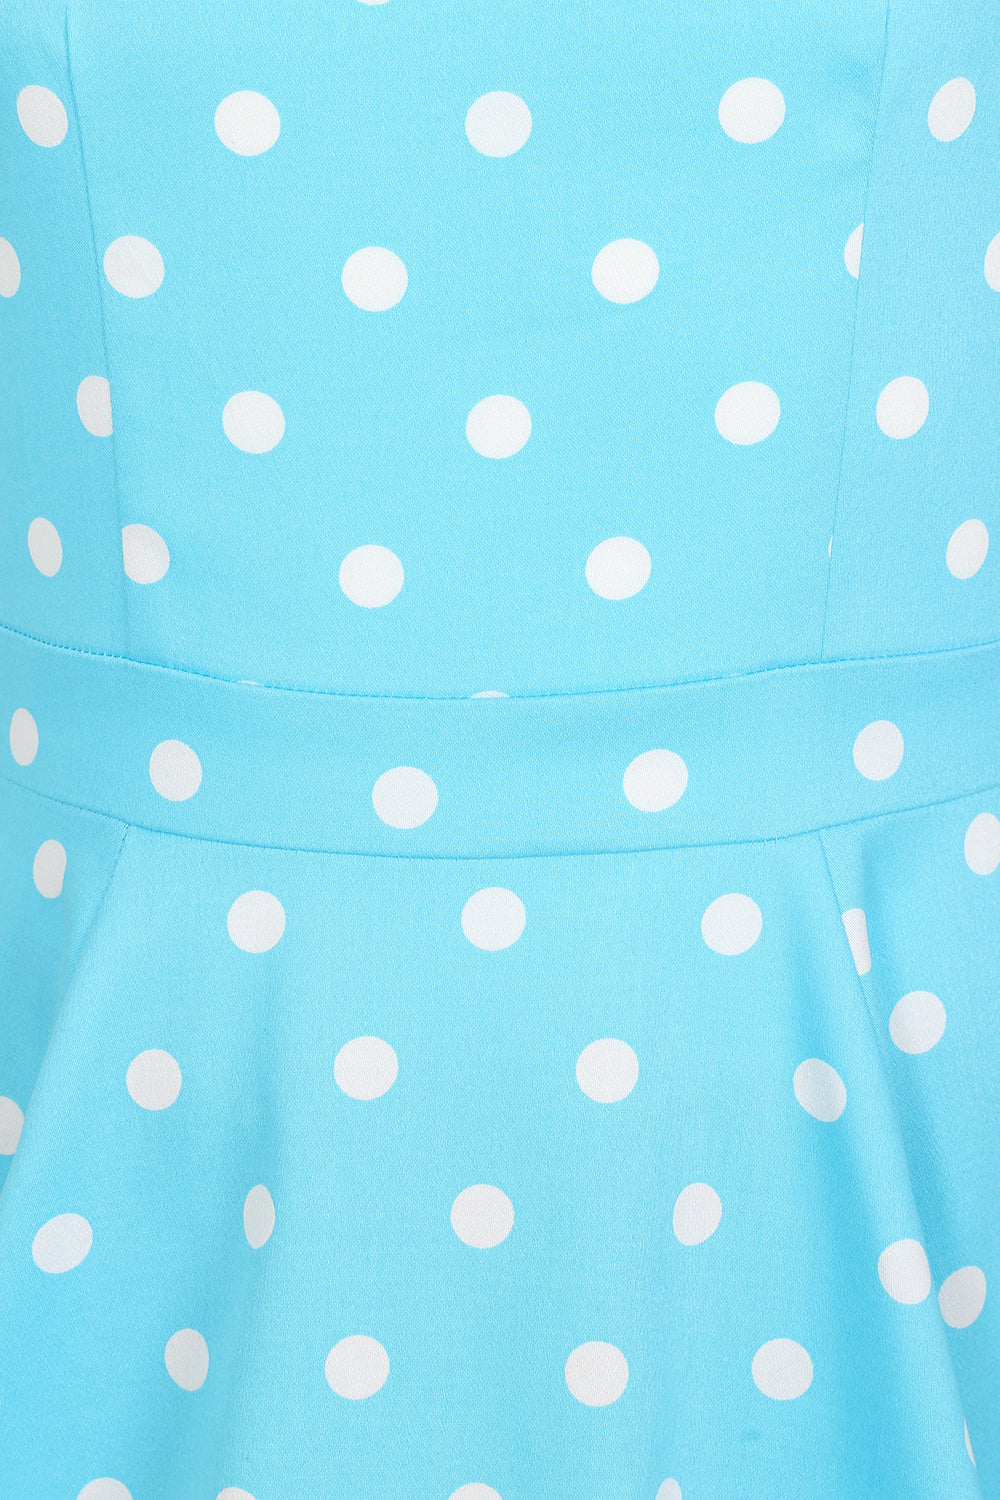 Girls Ruth Polka Dot Swing Dress by Hearts and Roses